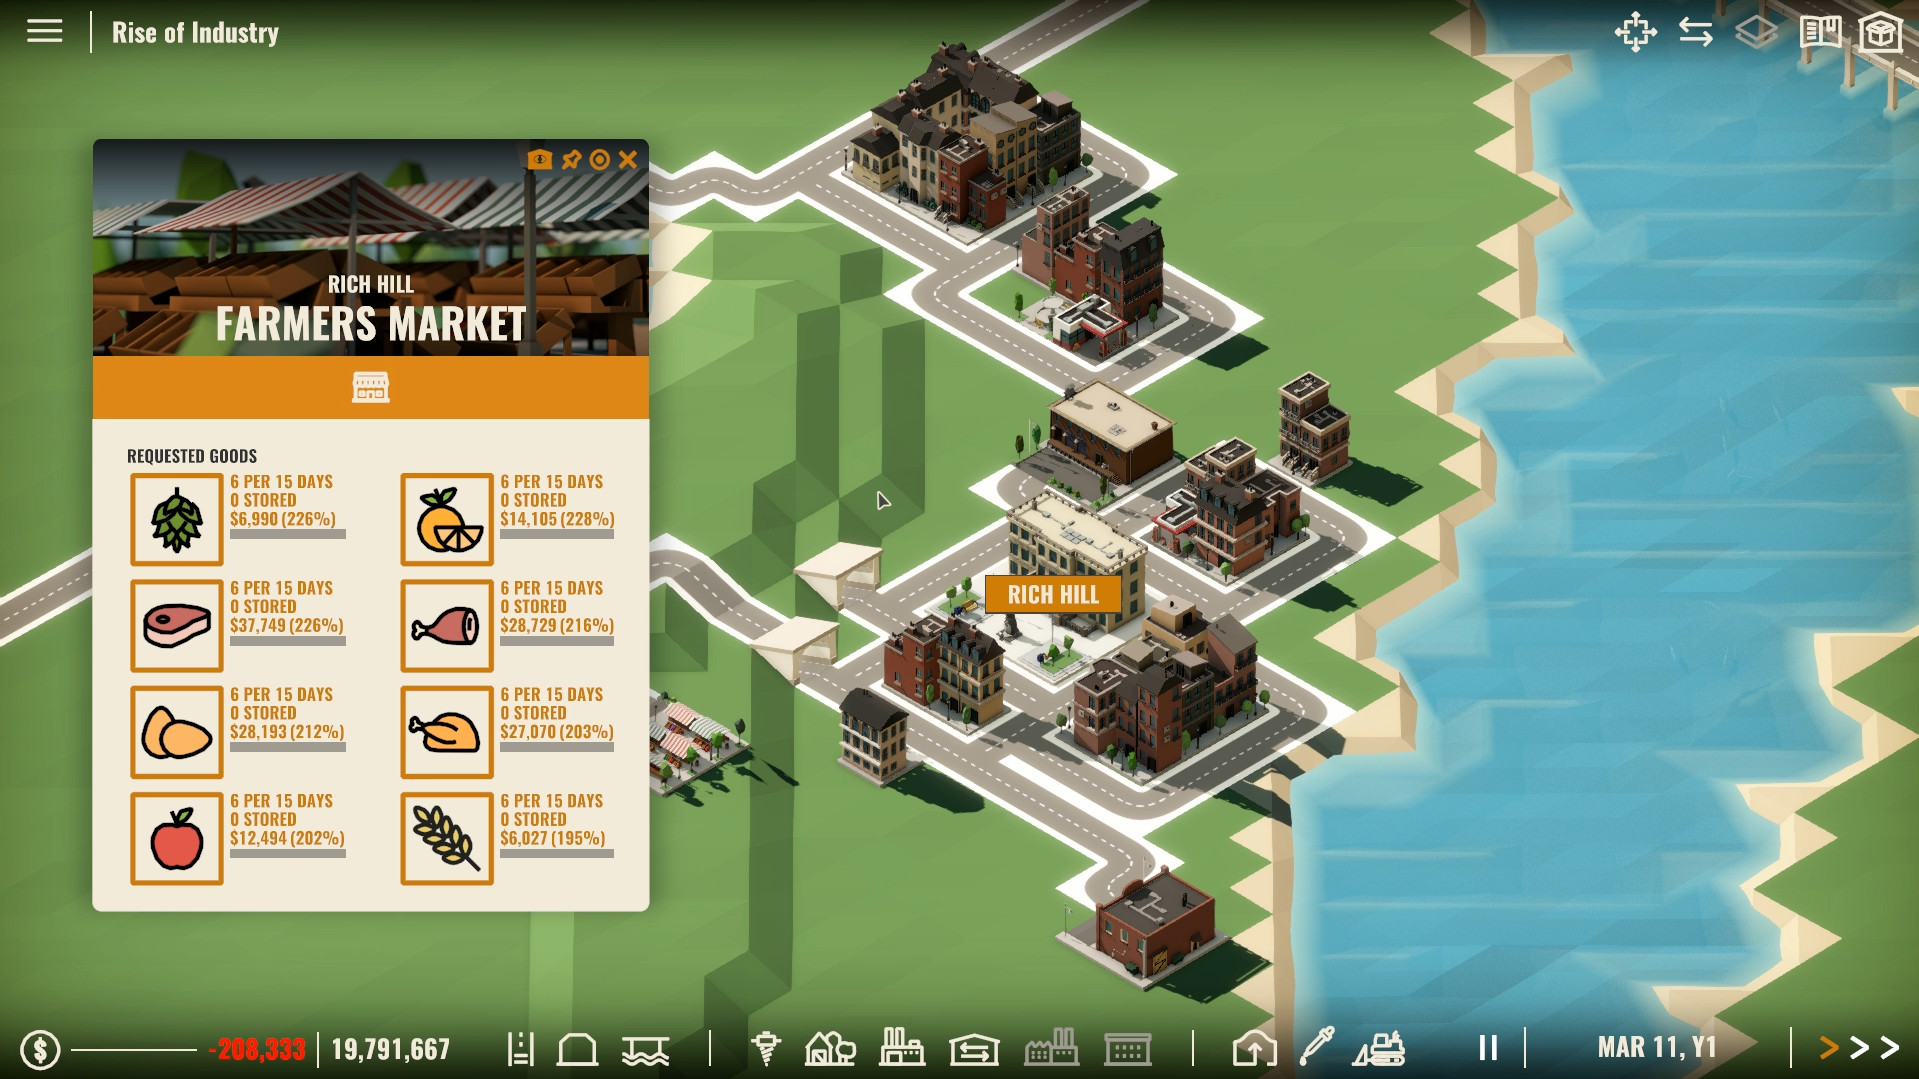 download rise of the industry for free